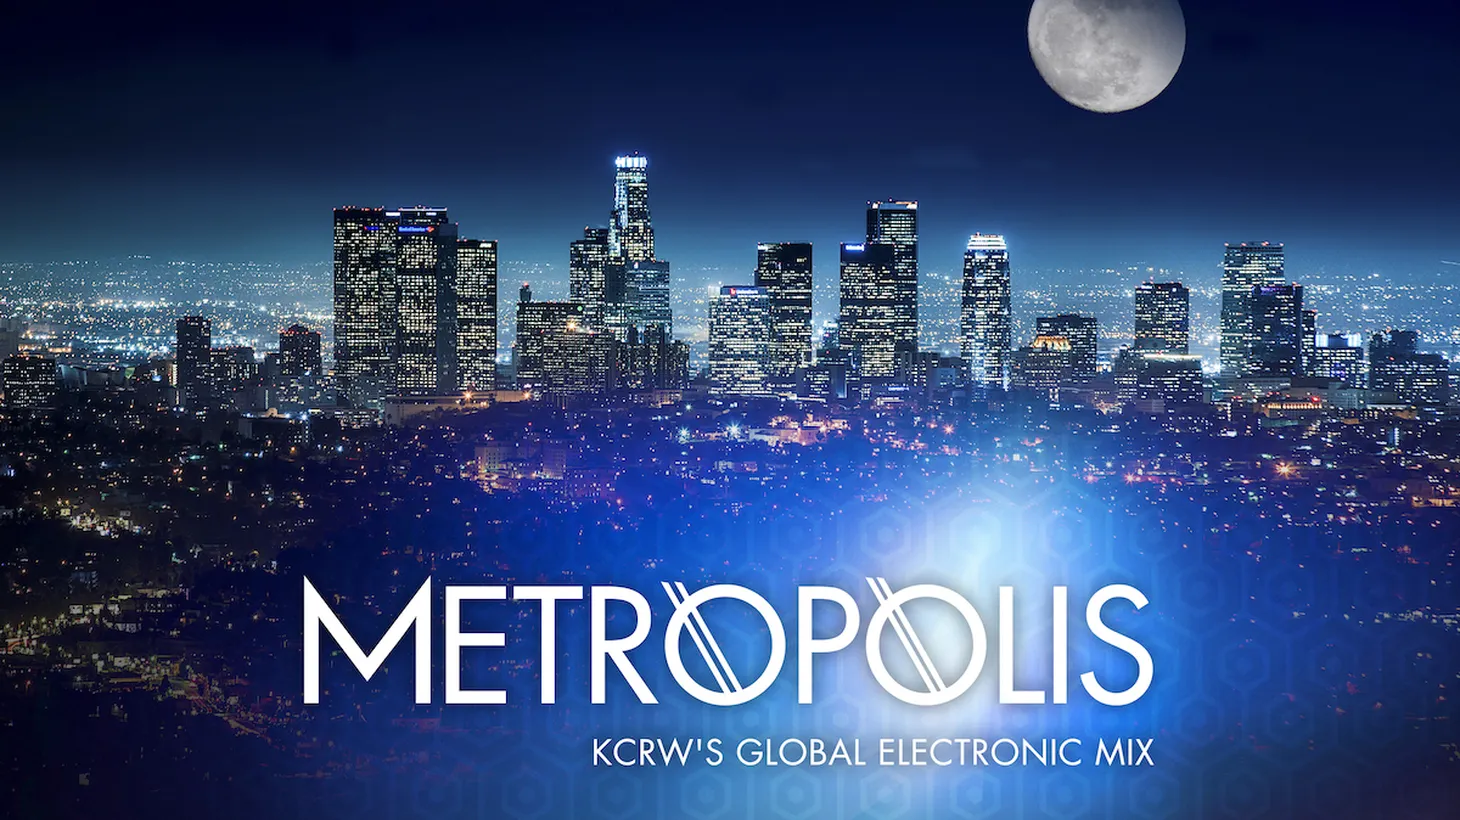 L.A. based duo, The Crystal Method steps into Metropolis for a visit during the 9:00pm hour to talk about their new album Legion of Boom.